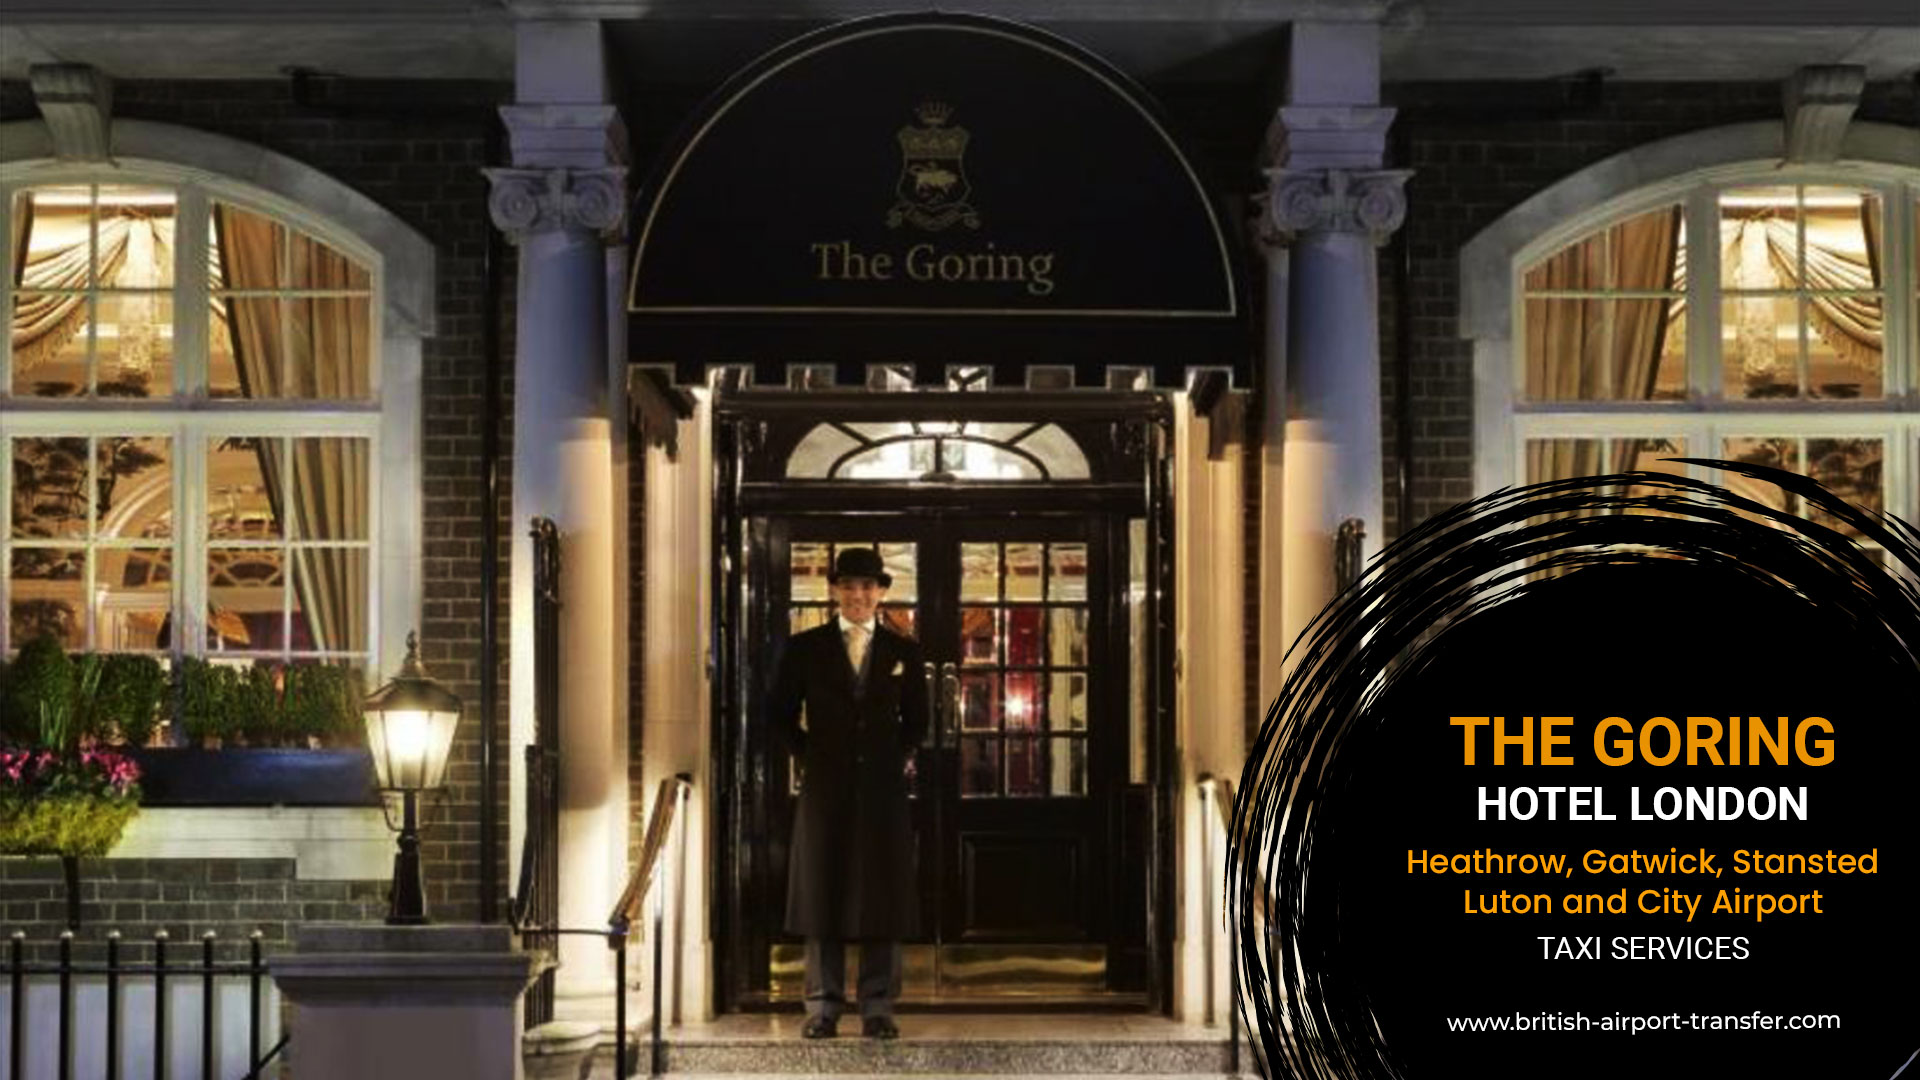 Taxi Service – The Goring Hotel London / SW1W 0JW